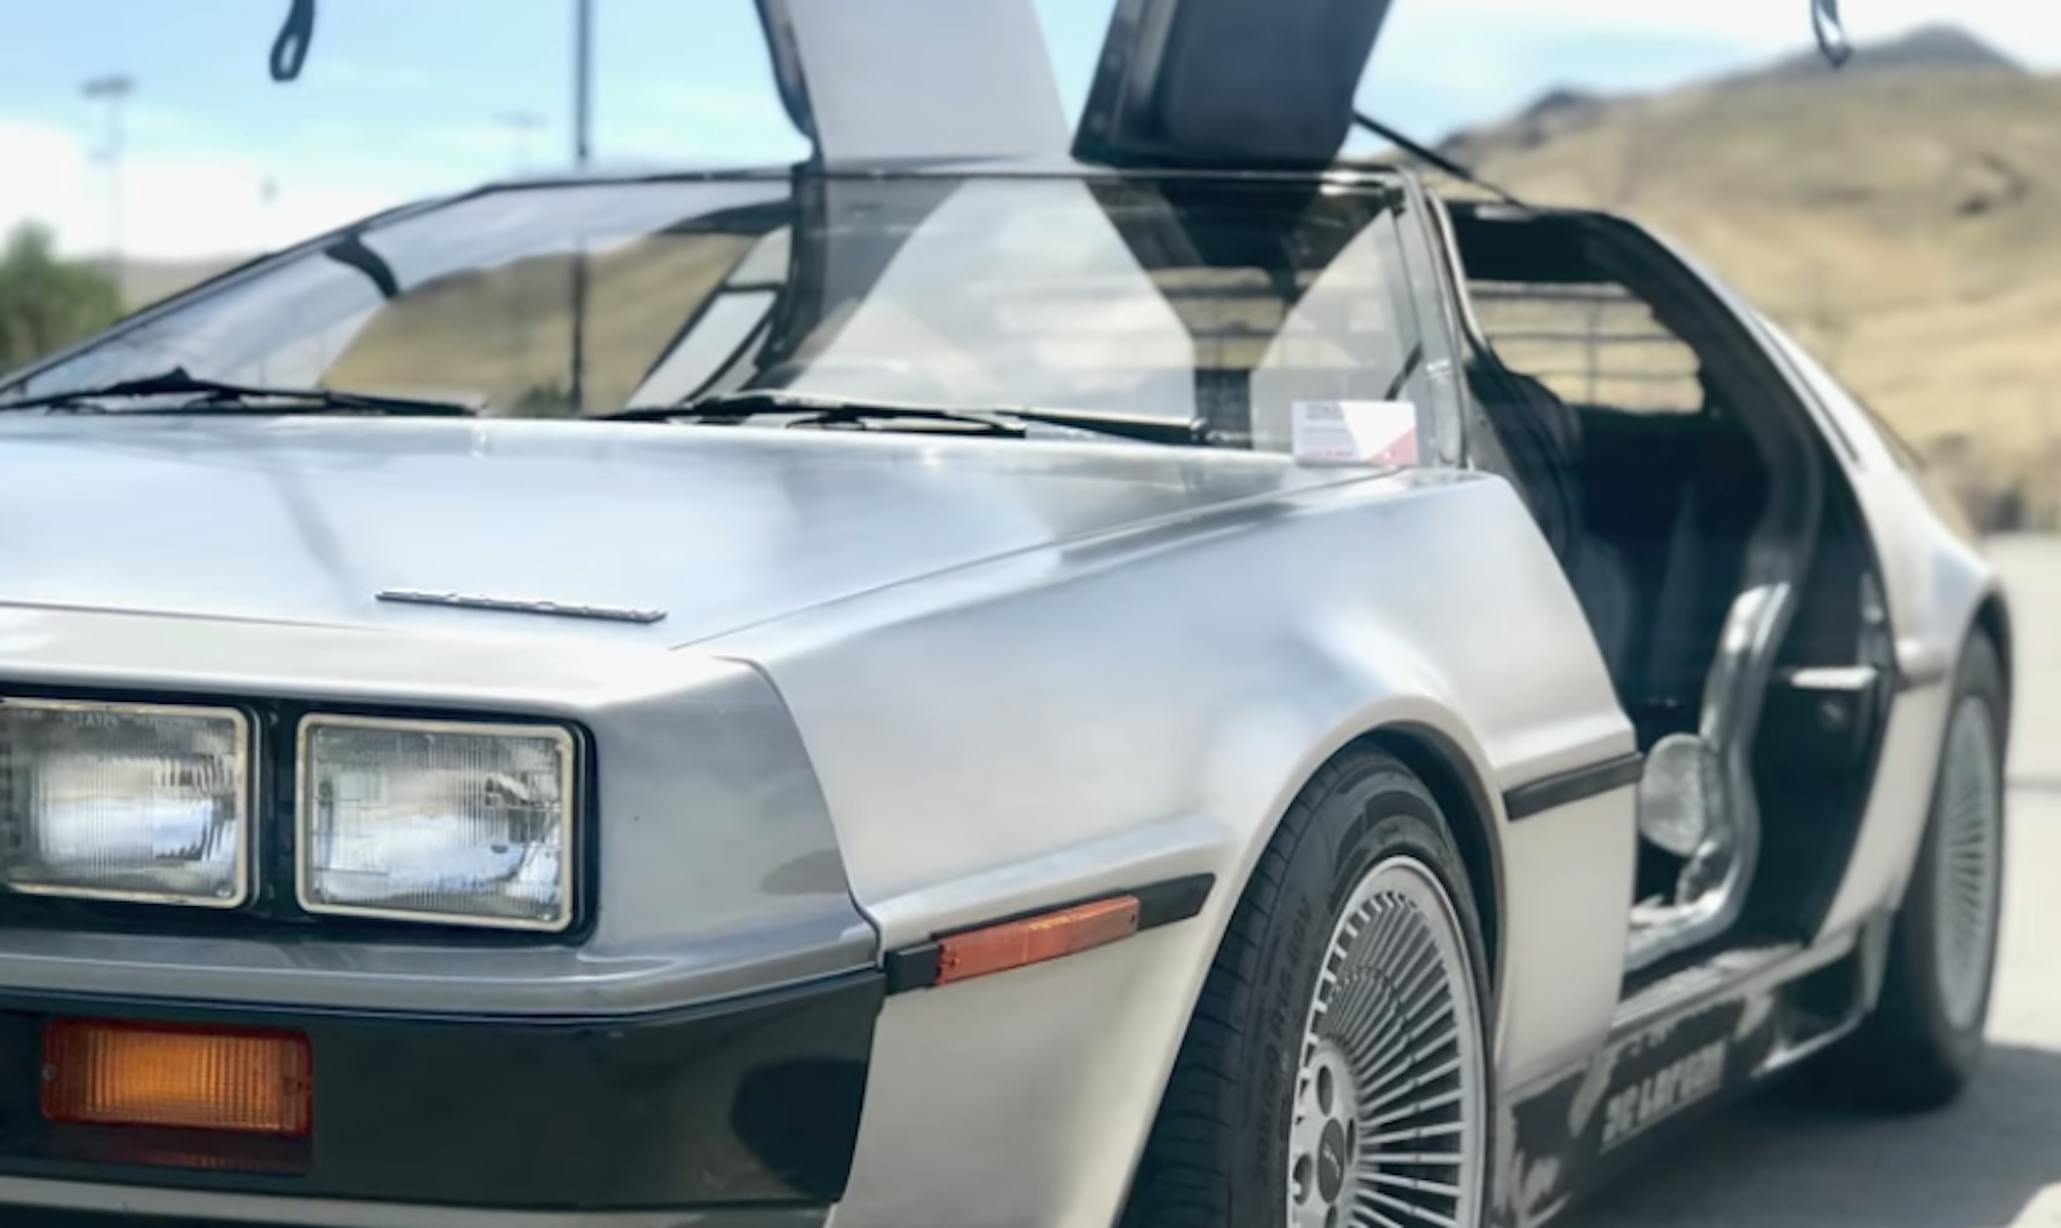 An Electric Conversion Gave a Dying DeLorean a Second Life